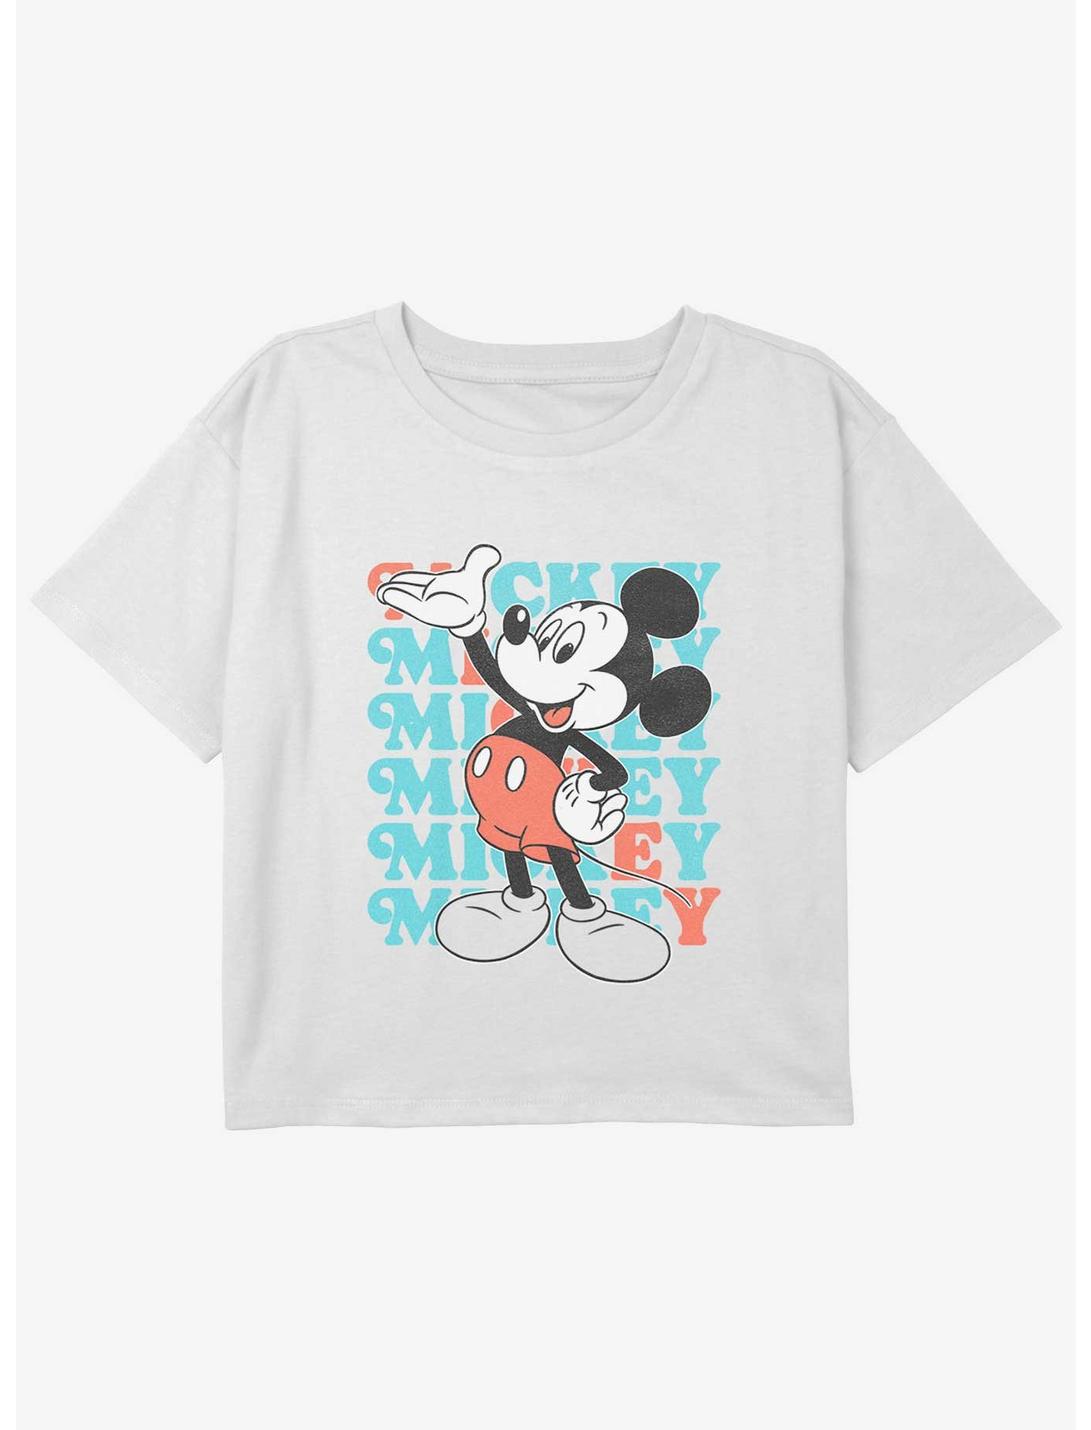 Disney Mickey Mouse Classic Mickey Girls Youth Crop T-Shirt, WHITE, hi-res